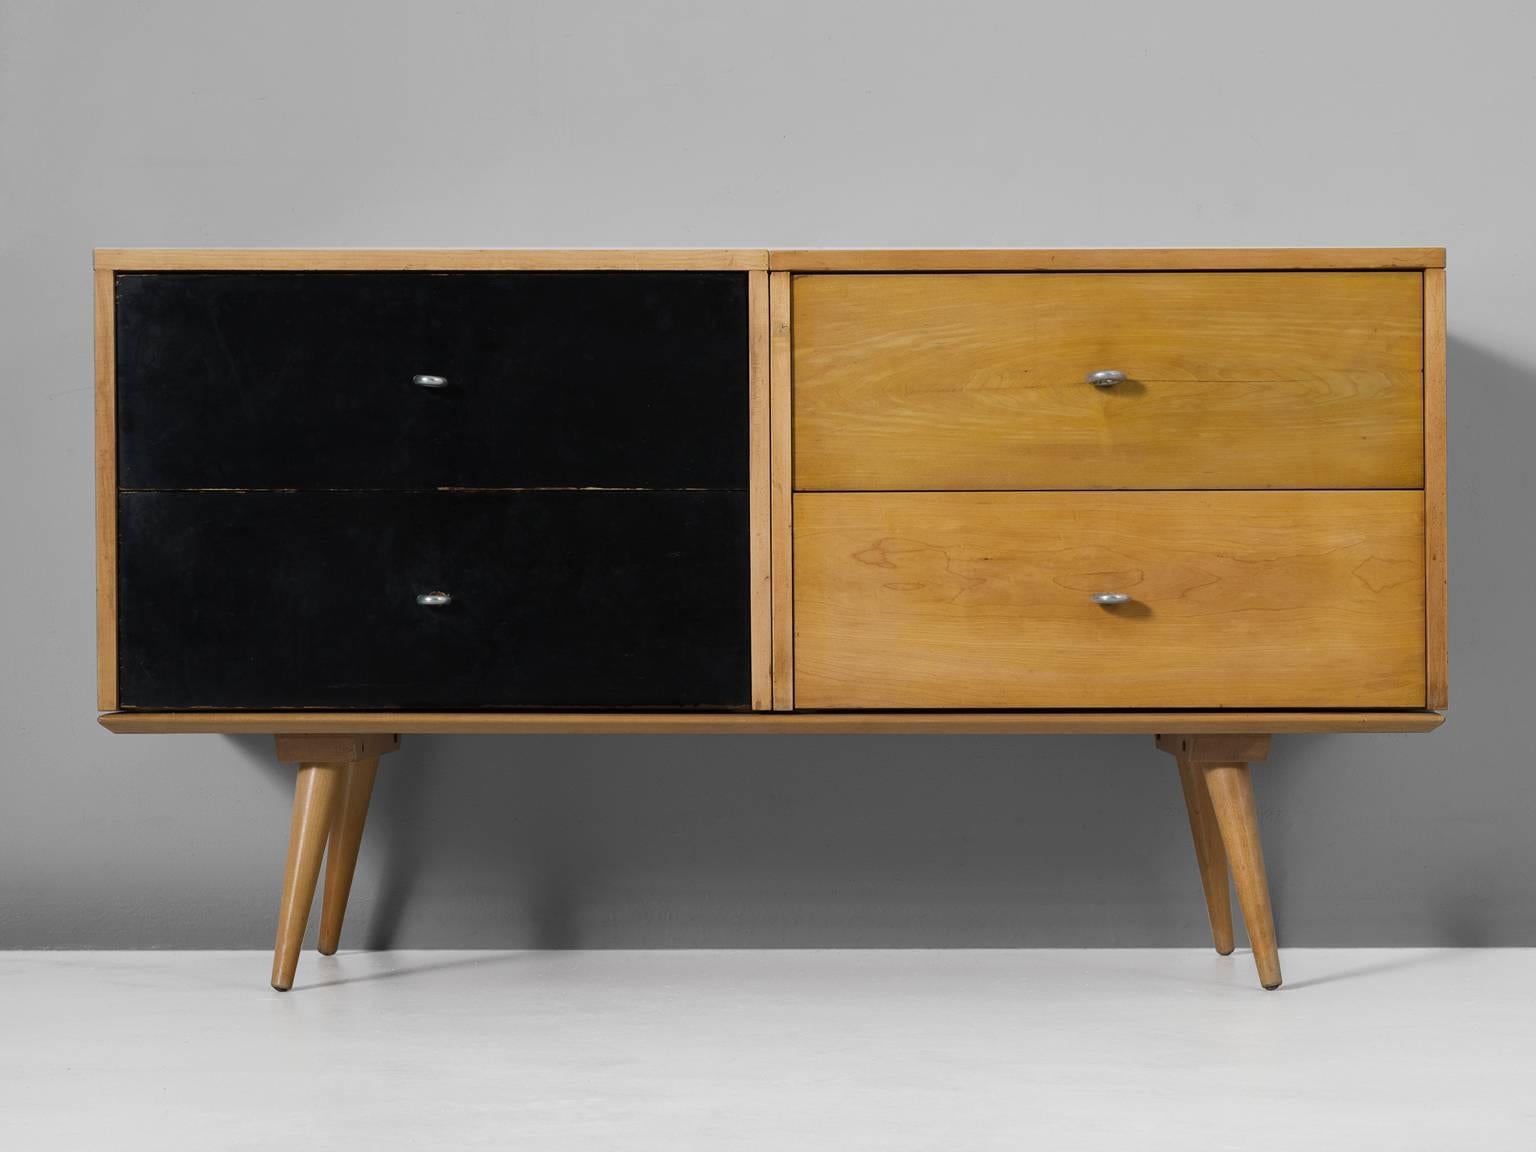 Paul McCobb small sideboard in maple, United States, 1950s.

This cute maple sideboard is easy one the eyes and seems solid in it's appearance. However, black and white could also be white and black as these cabinets are separate elements and can